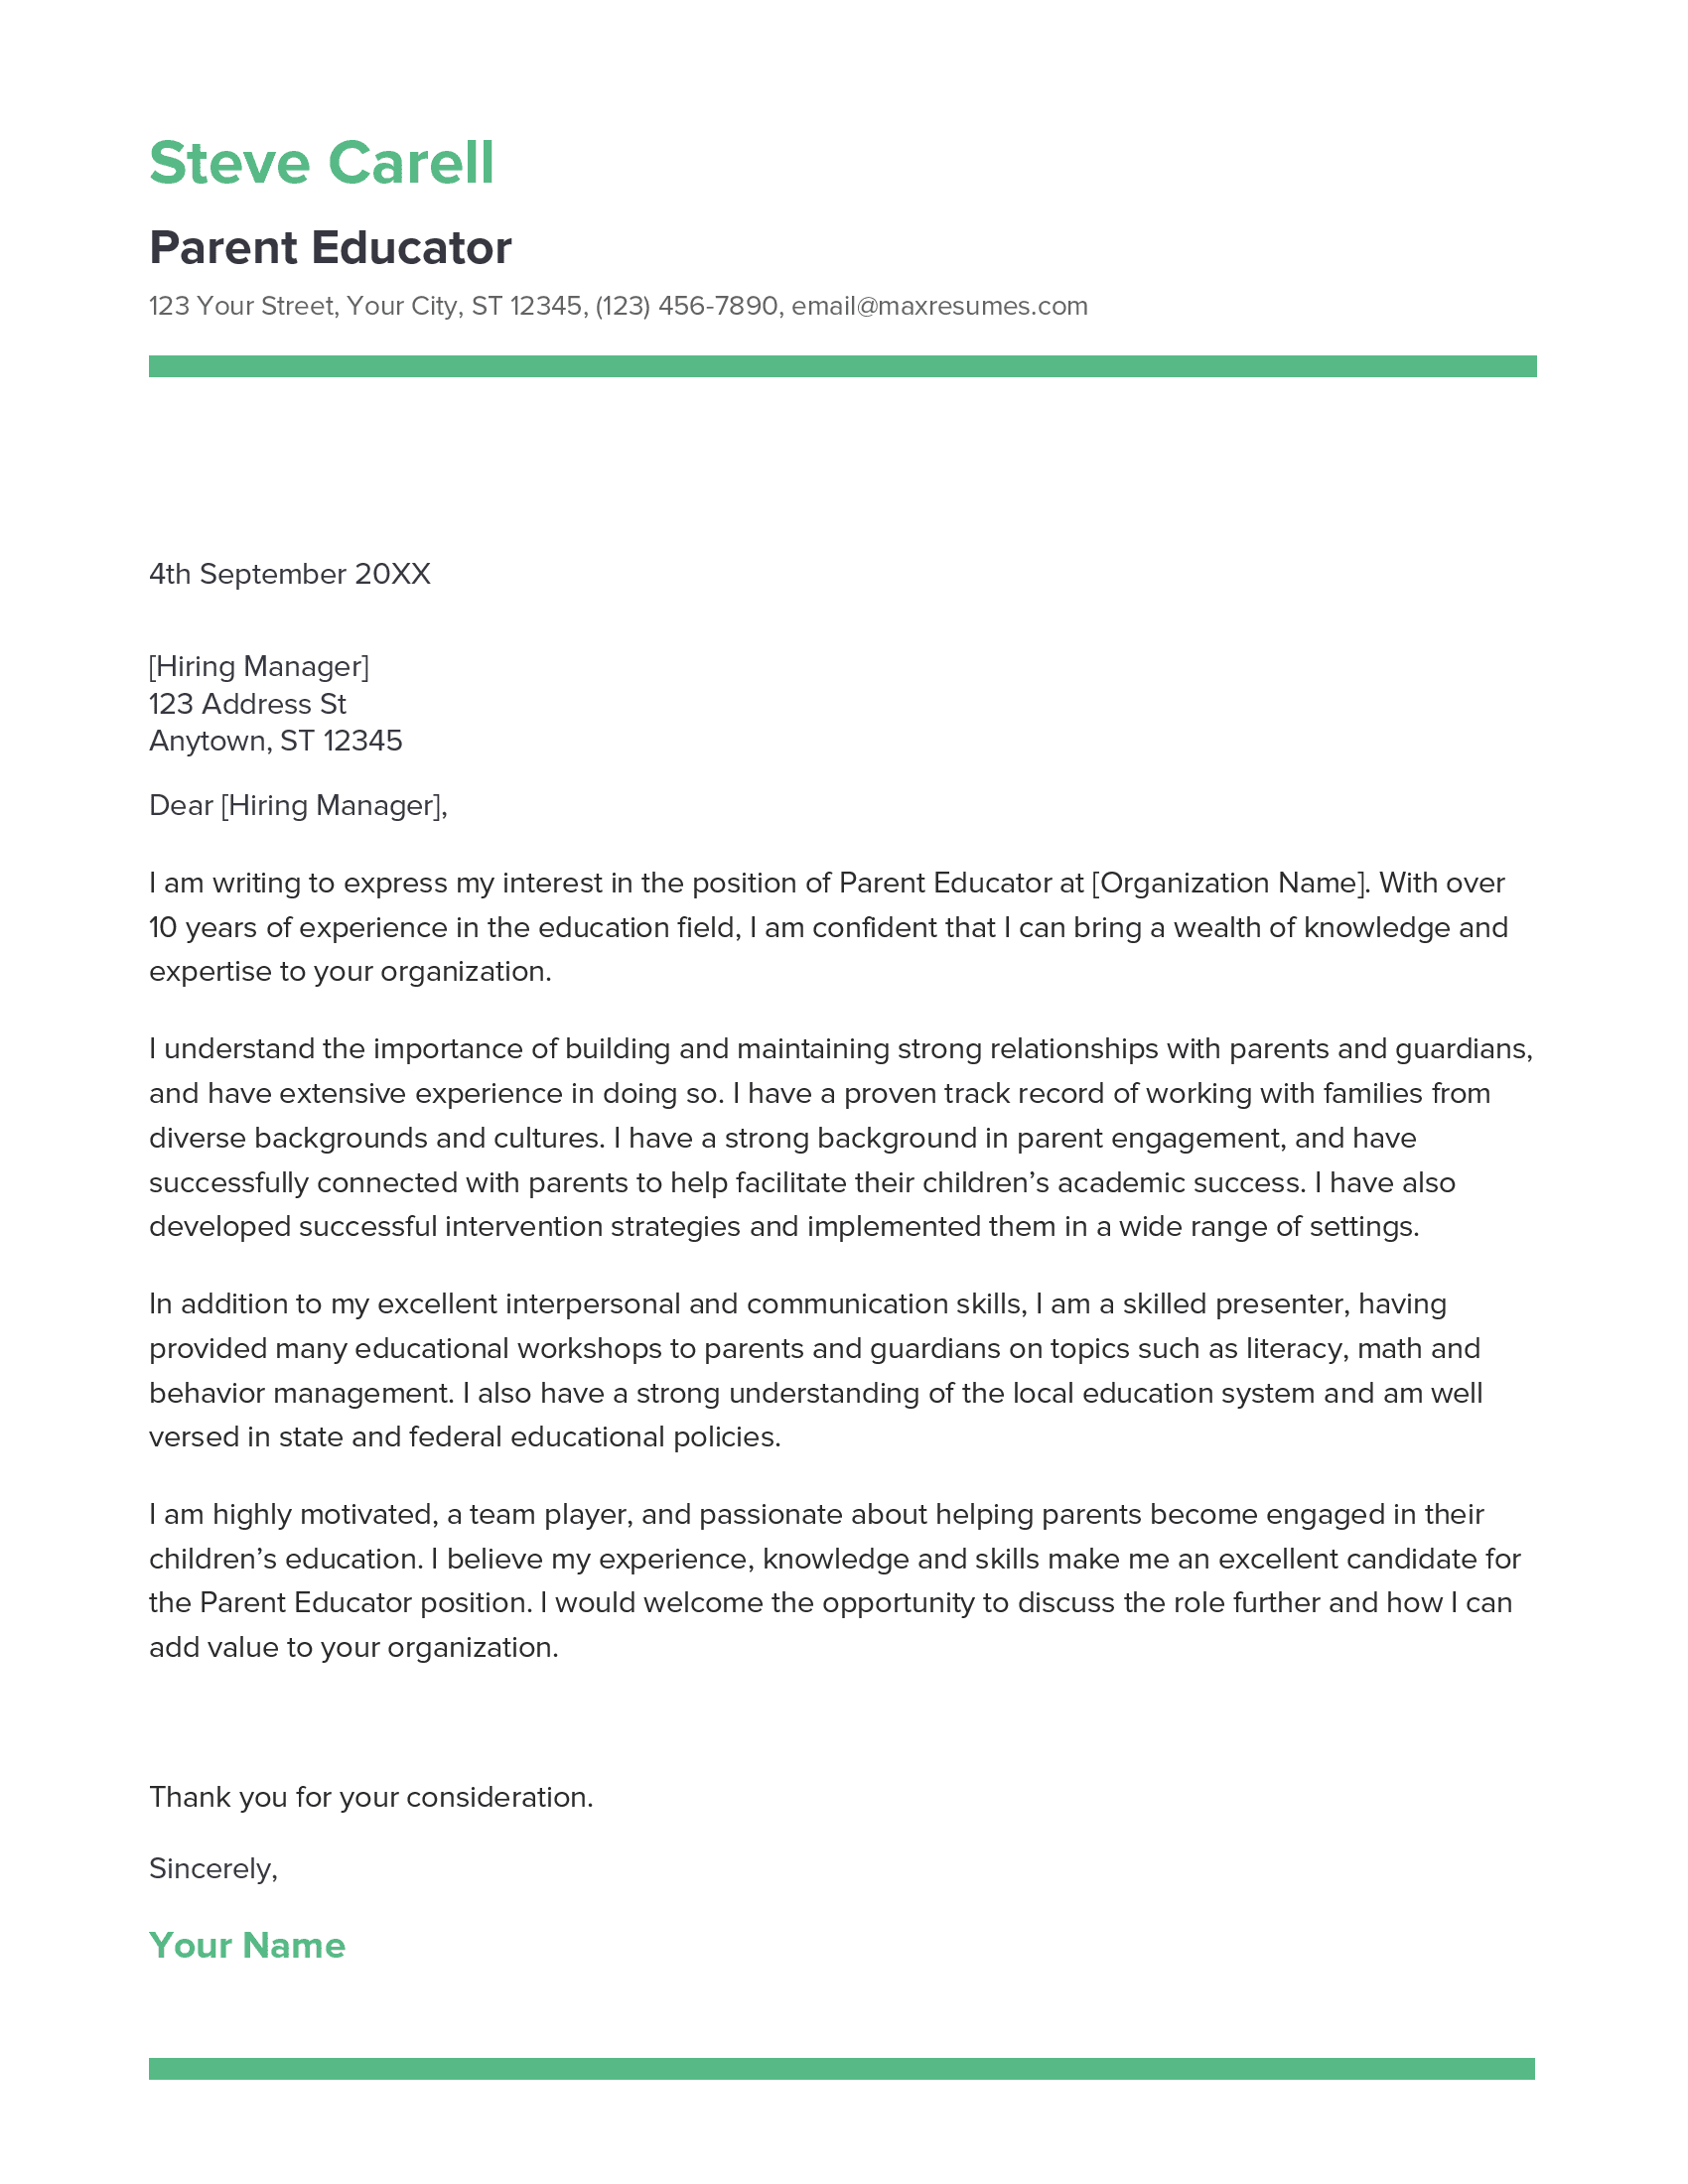 Parent Educator Cover Letter Example